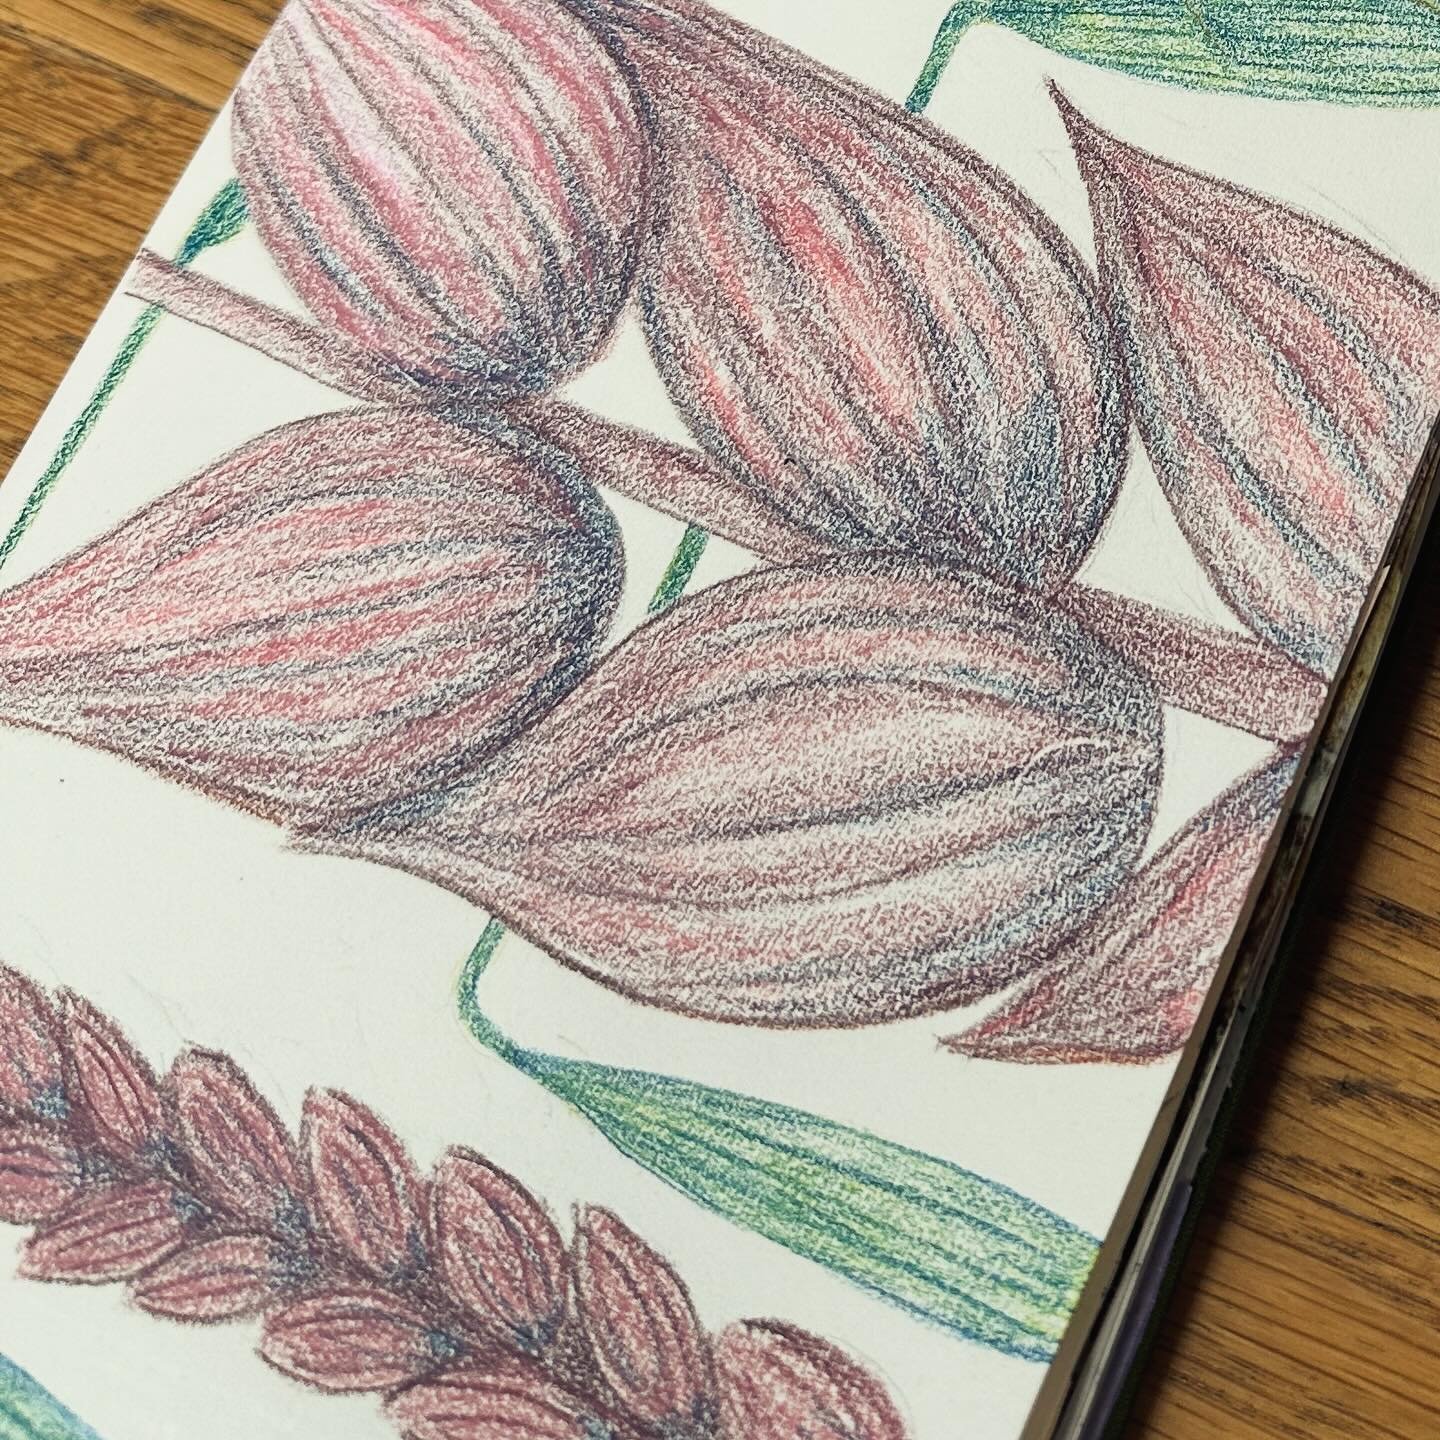 The shapes of all the different grasses bursting into Spring these days, oh my gosh, I had to draw them! Colored pencils only - unusual medium for me but I really enjoyed the process so I&rsquo;ll probably be using them more!

#sketchbookart #drawdai